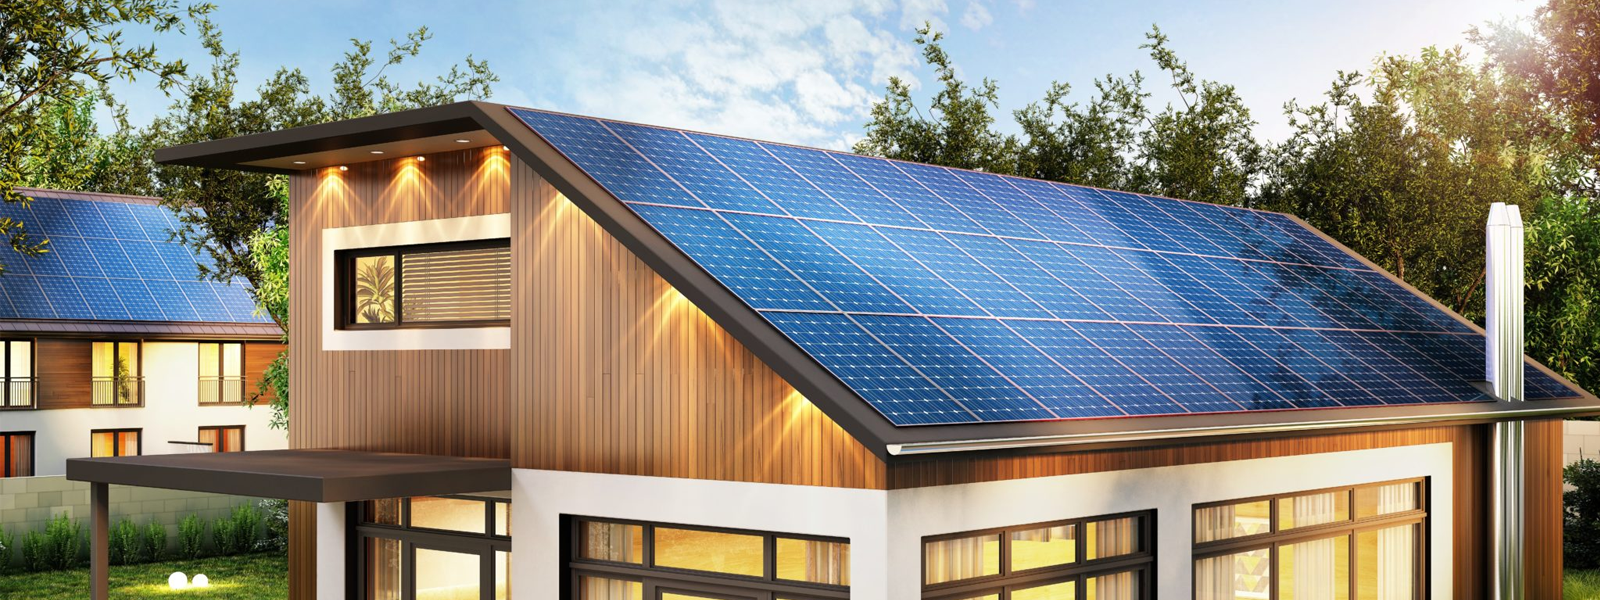 solar roofing system